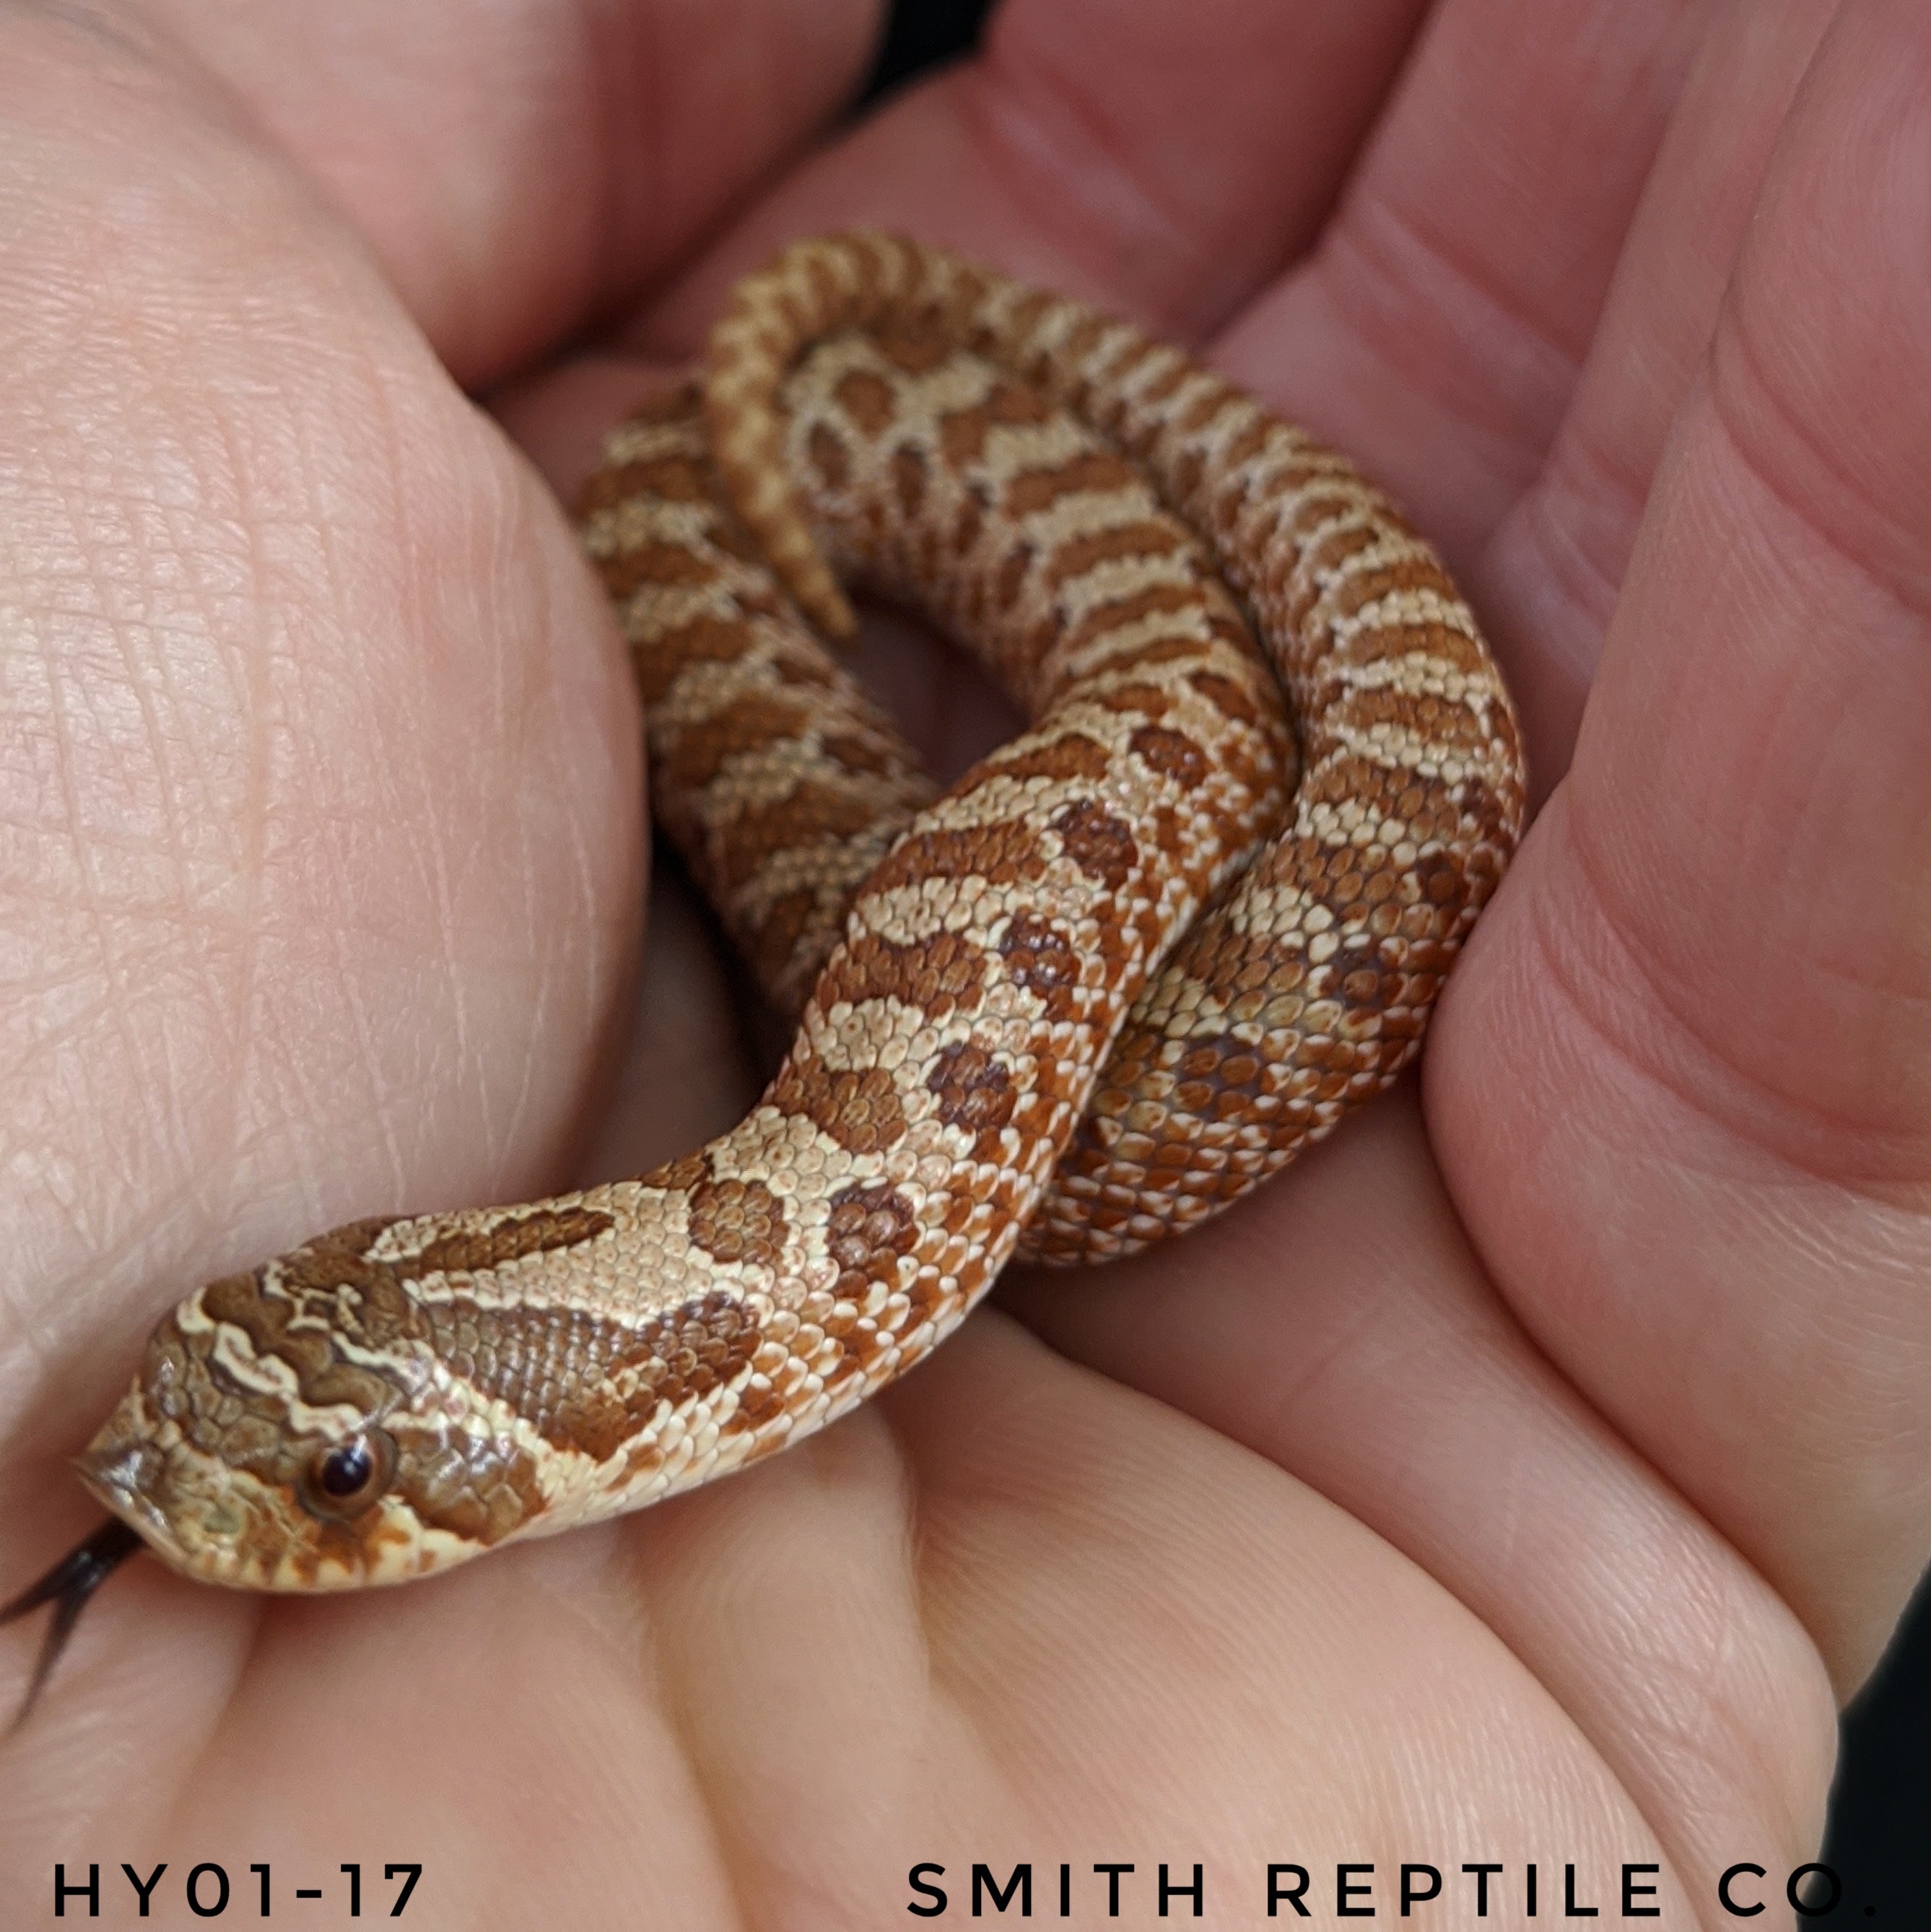 Evans Hypo Western Hognose by Smith Reptile Co.